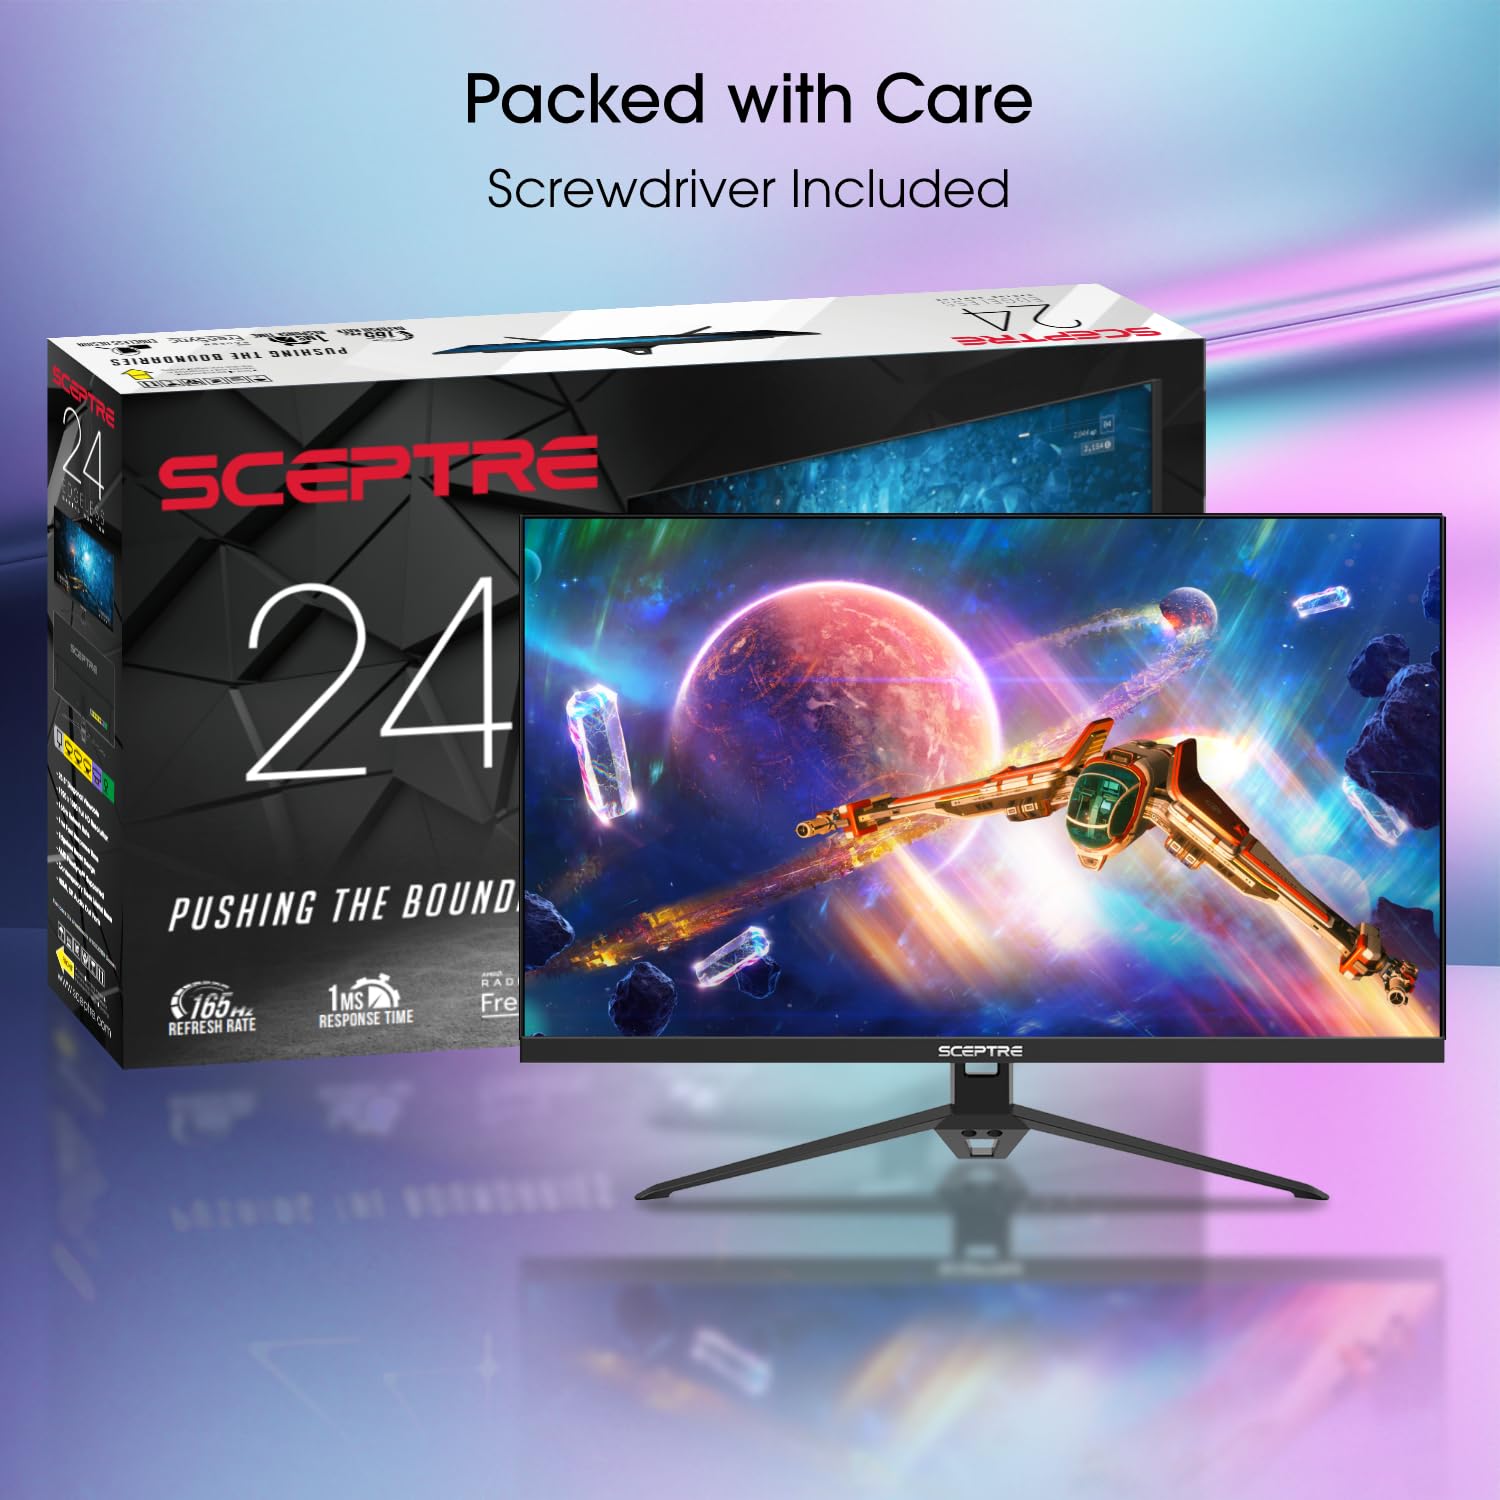 Sceptre IPS 24” Gaming Monitor 165Hz 144Hz Full HD (1920 x 1080) FreeSync Eye Care FPS RTS DisplayPort HDMI $99.97 Prime Exclusive and without